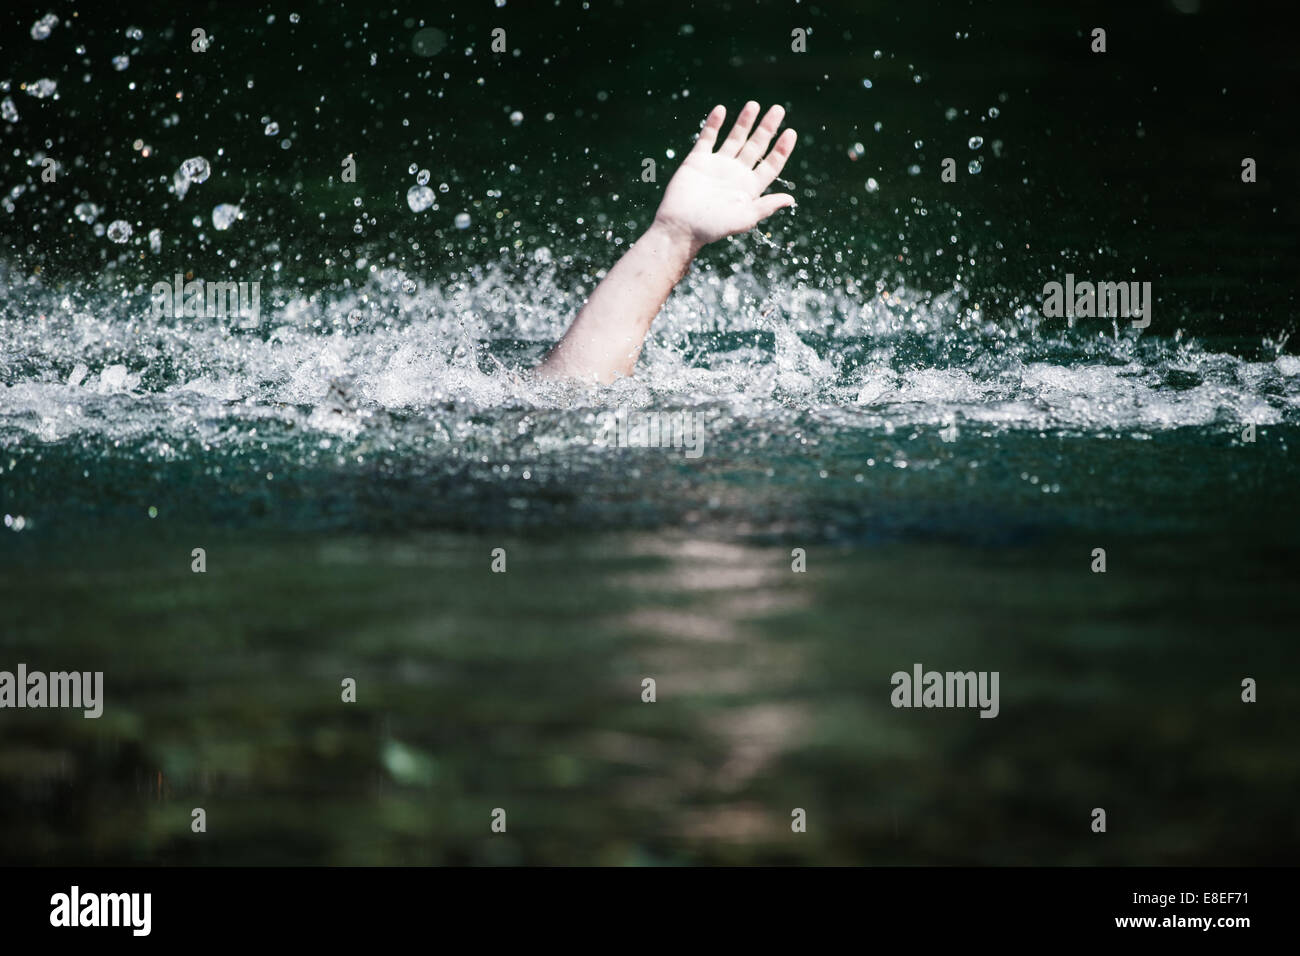 Moving Hand of Someone Drowning and in Need of Help Stock Photo